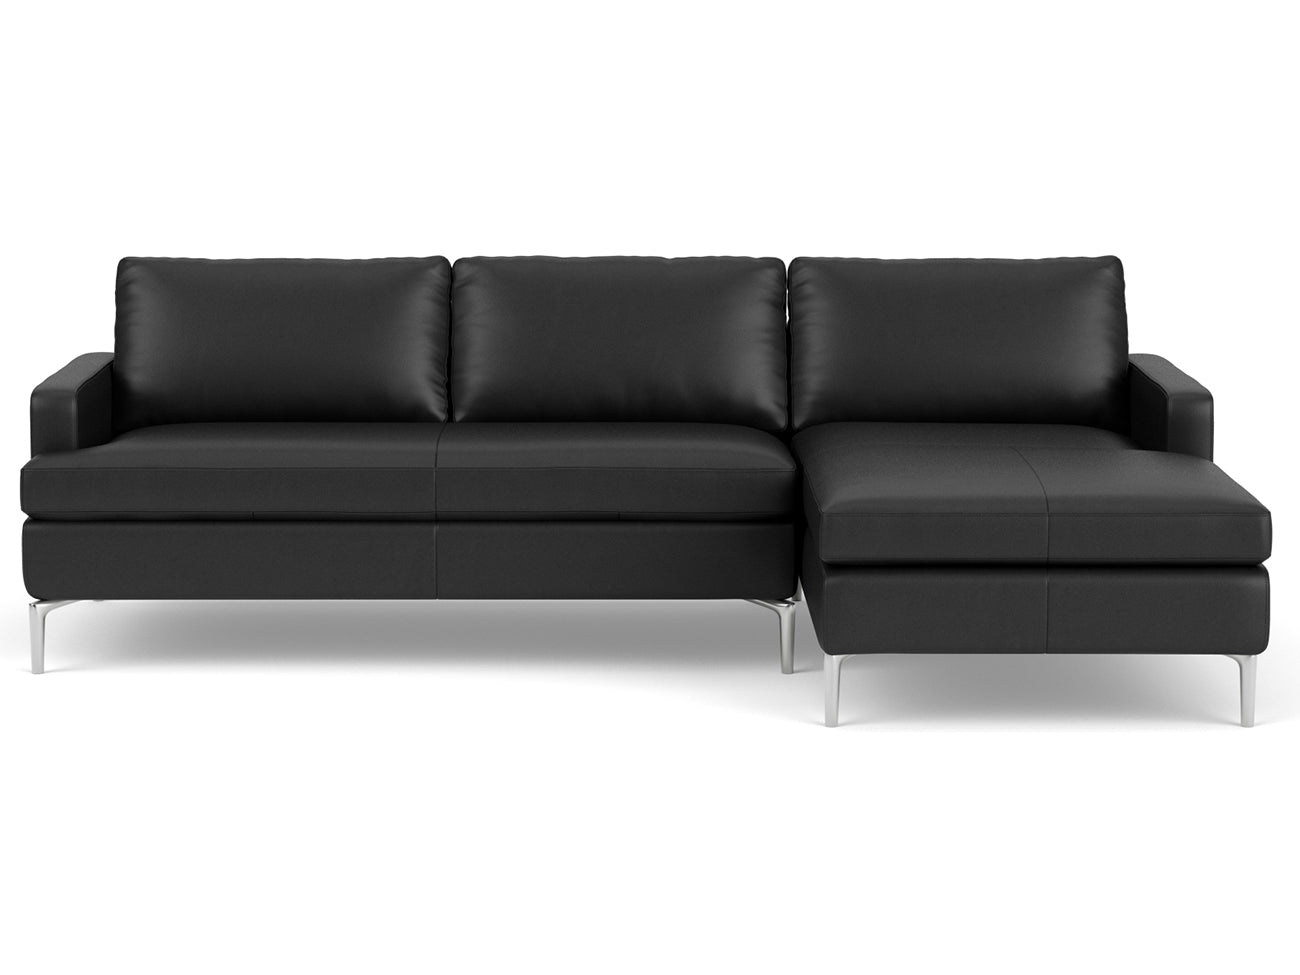 Eve Sectional Leather